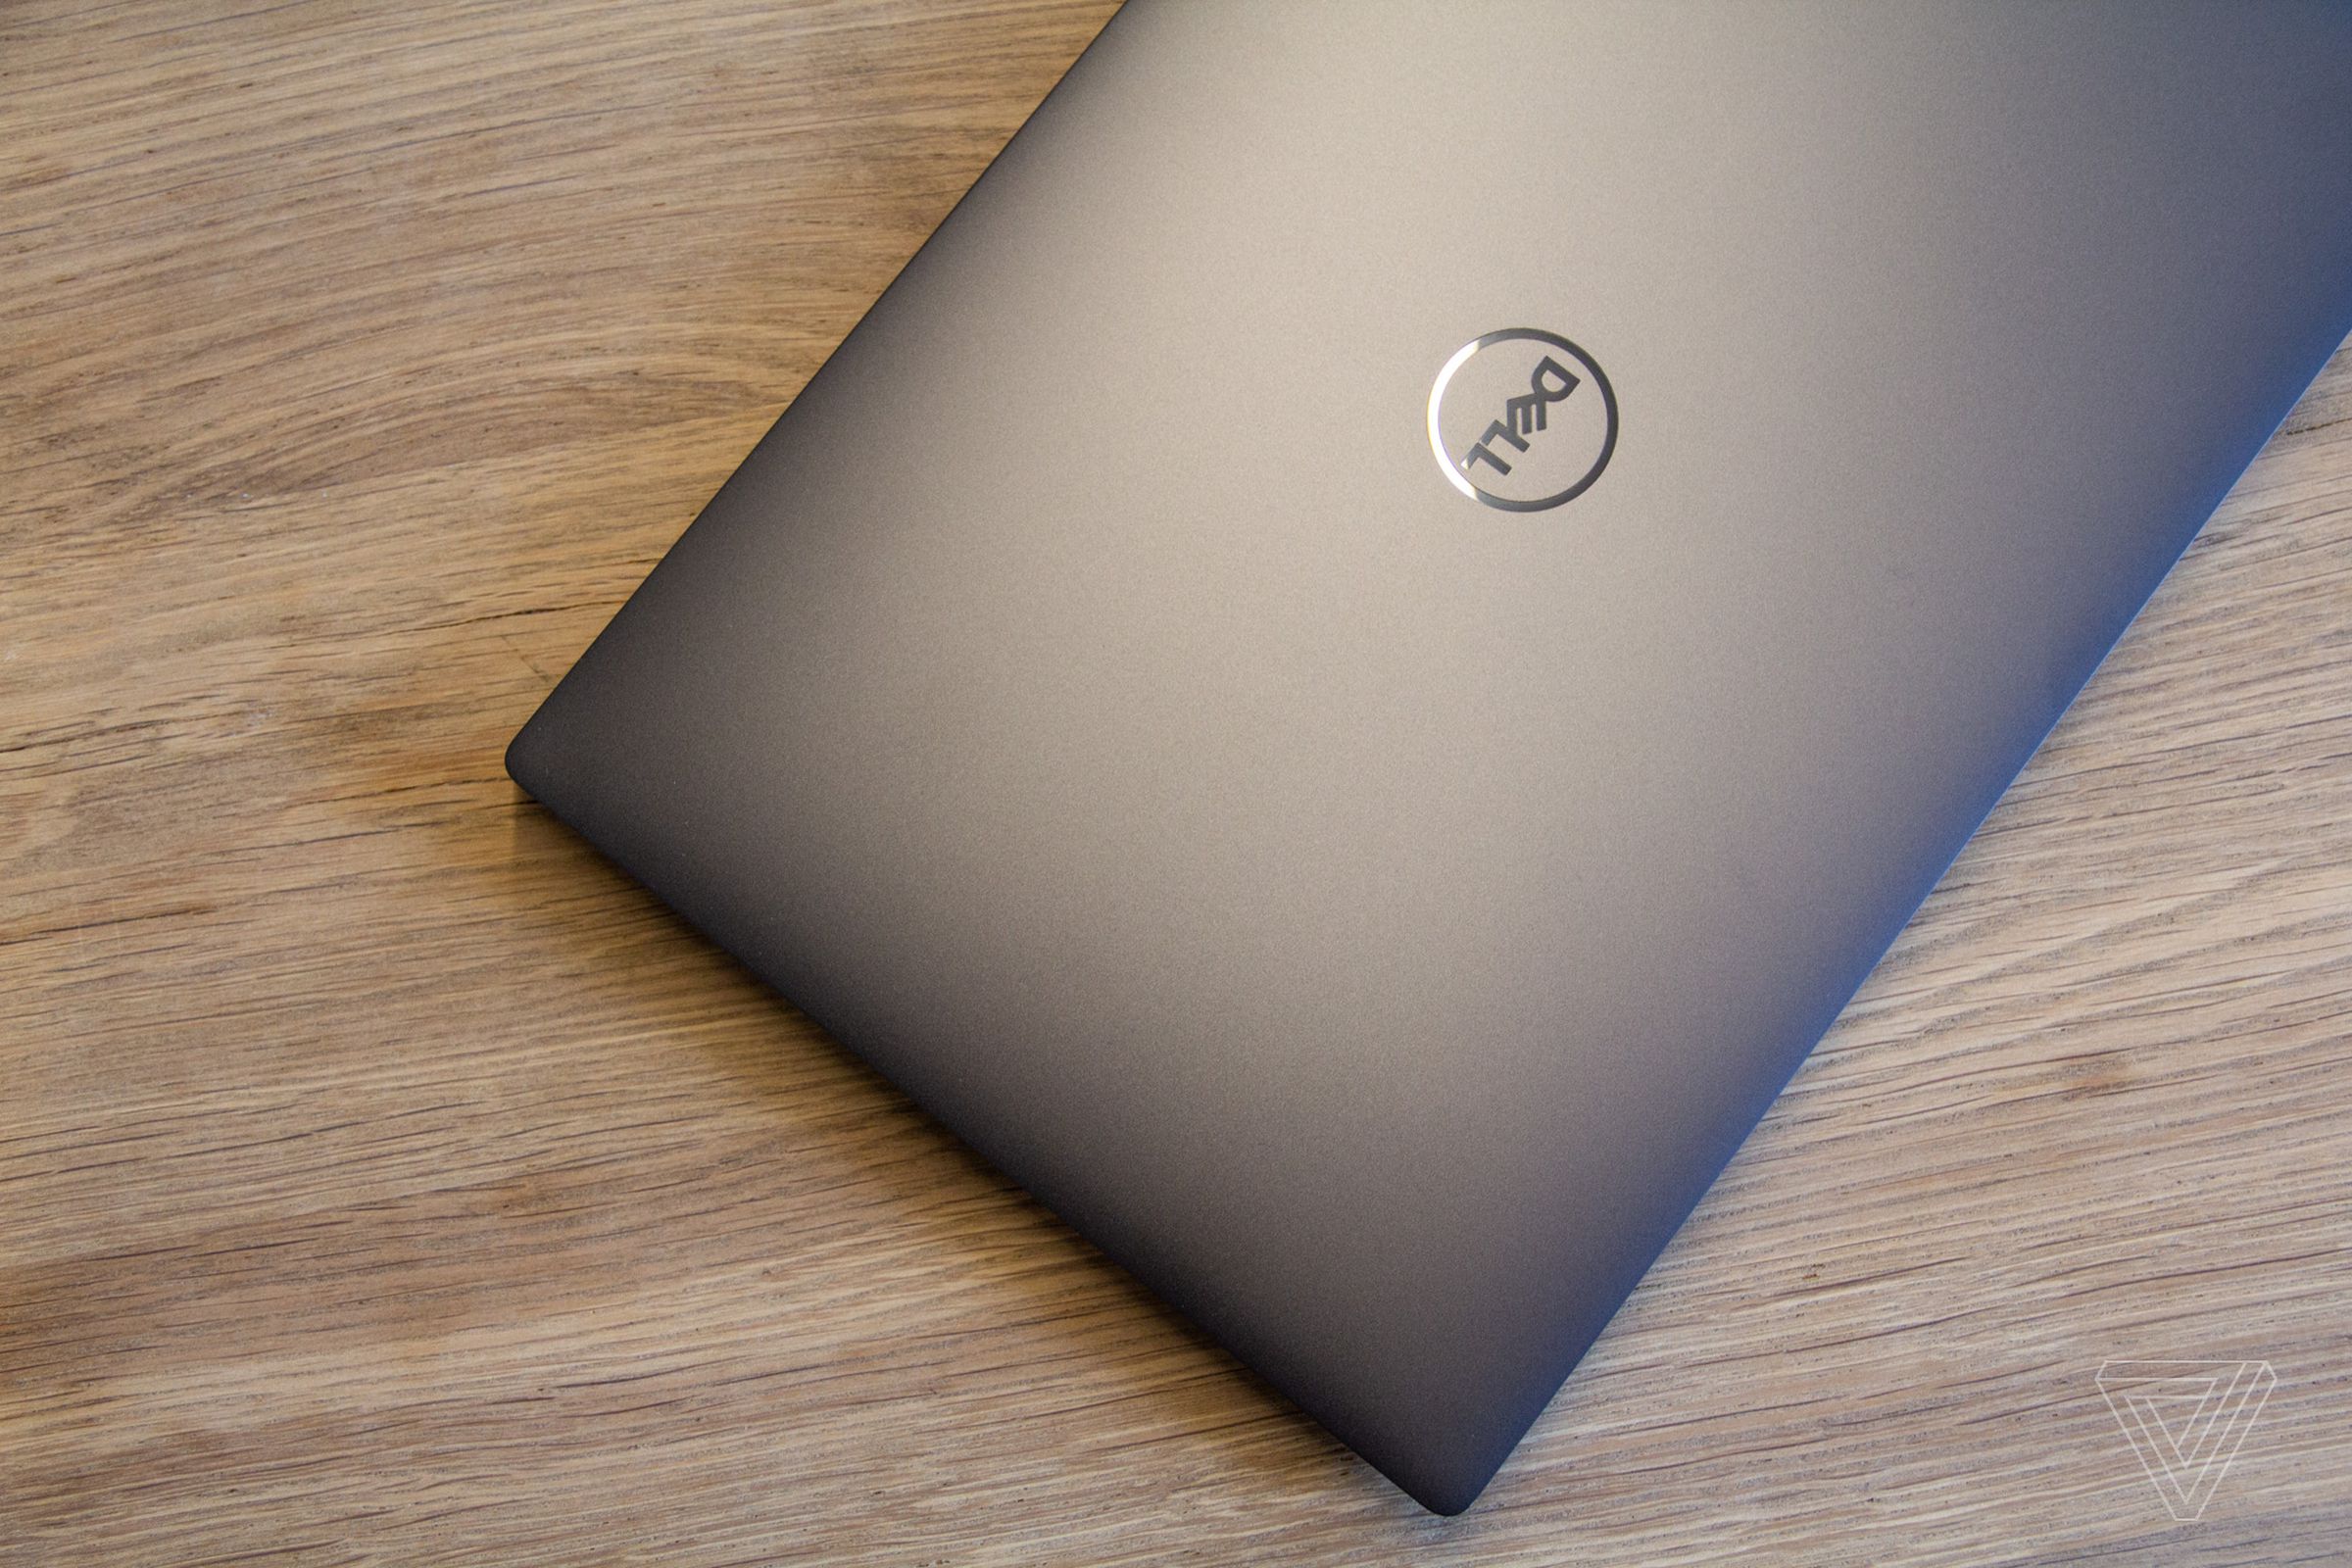 The lid of the Dell XPS 13 Plus on a wooden table seen from above.